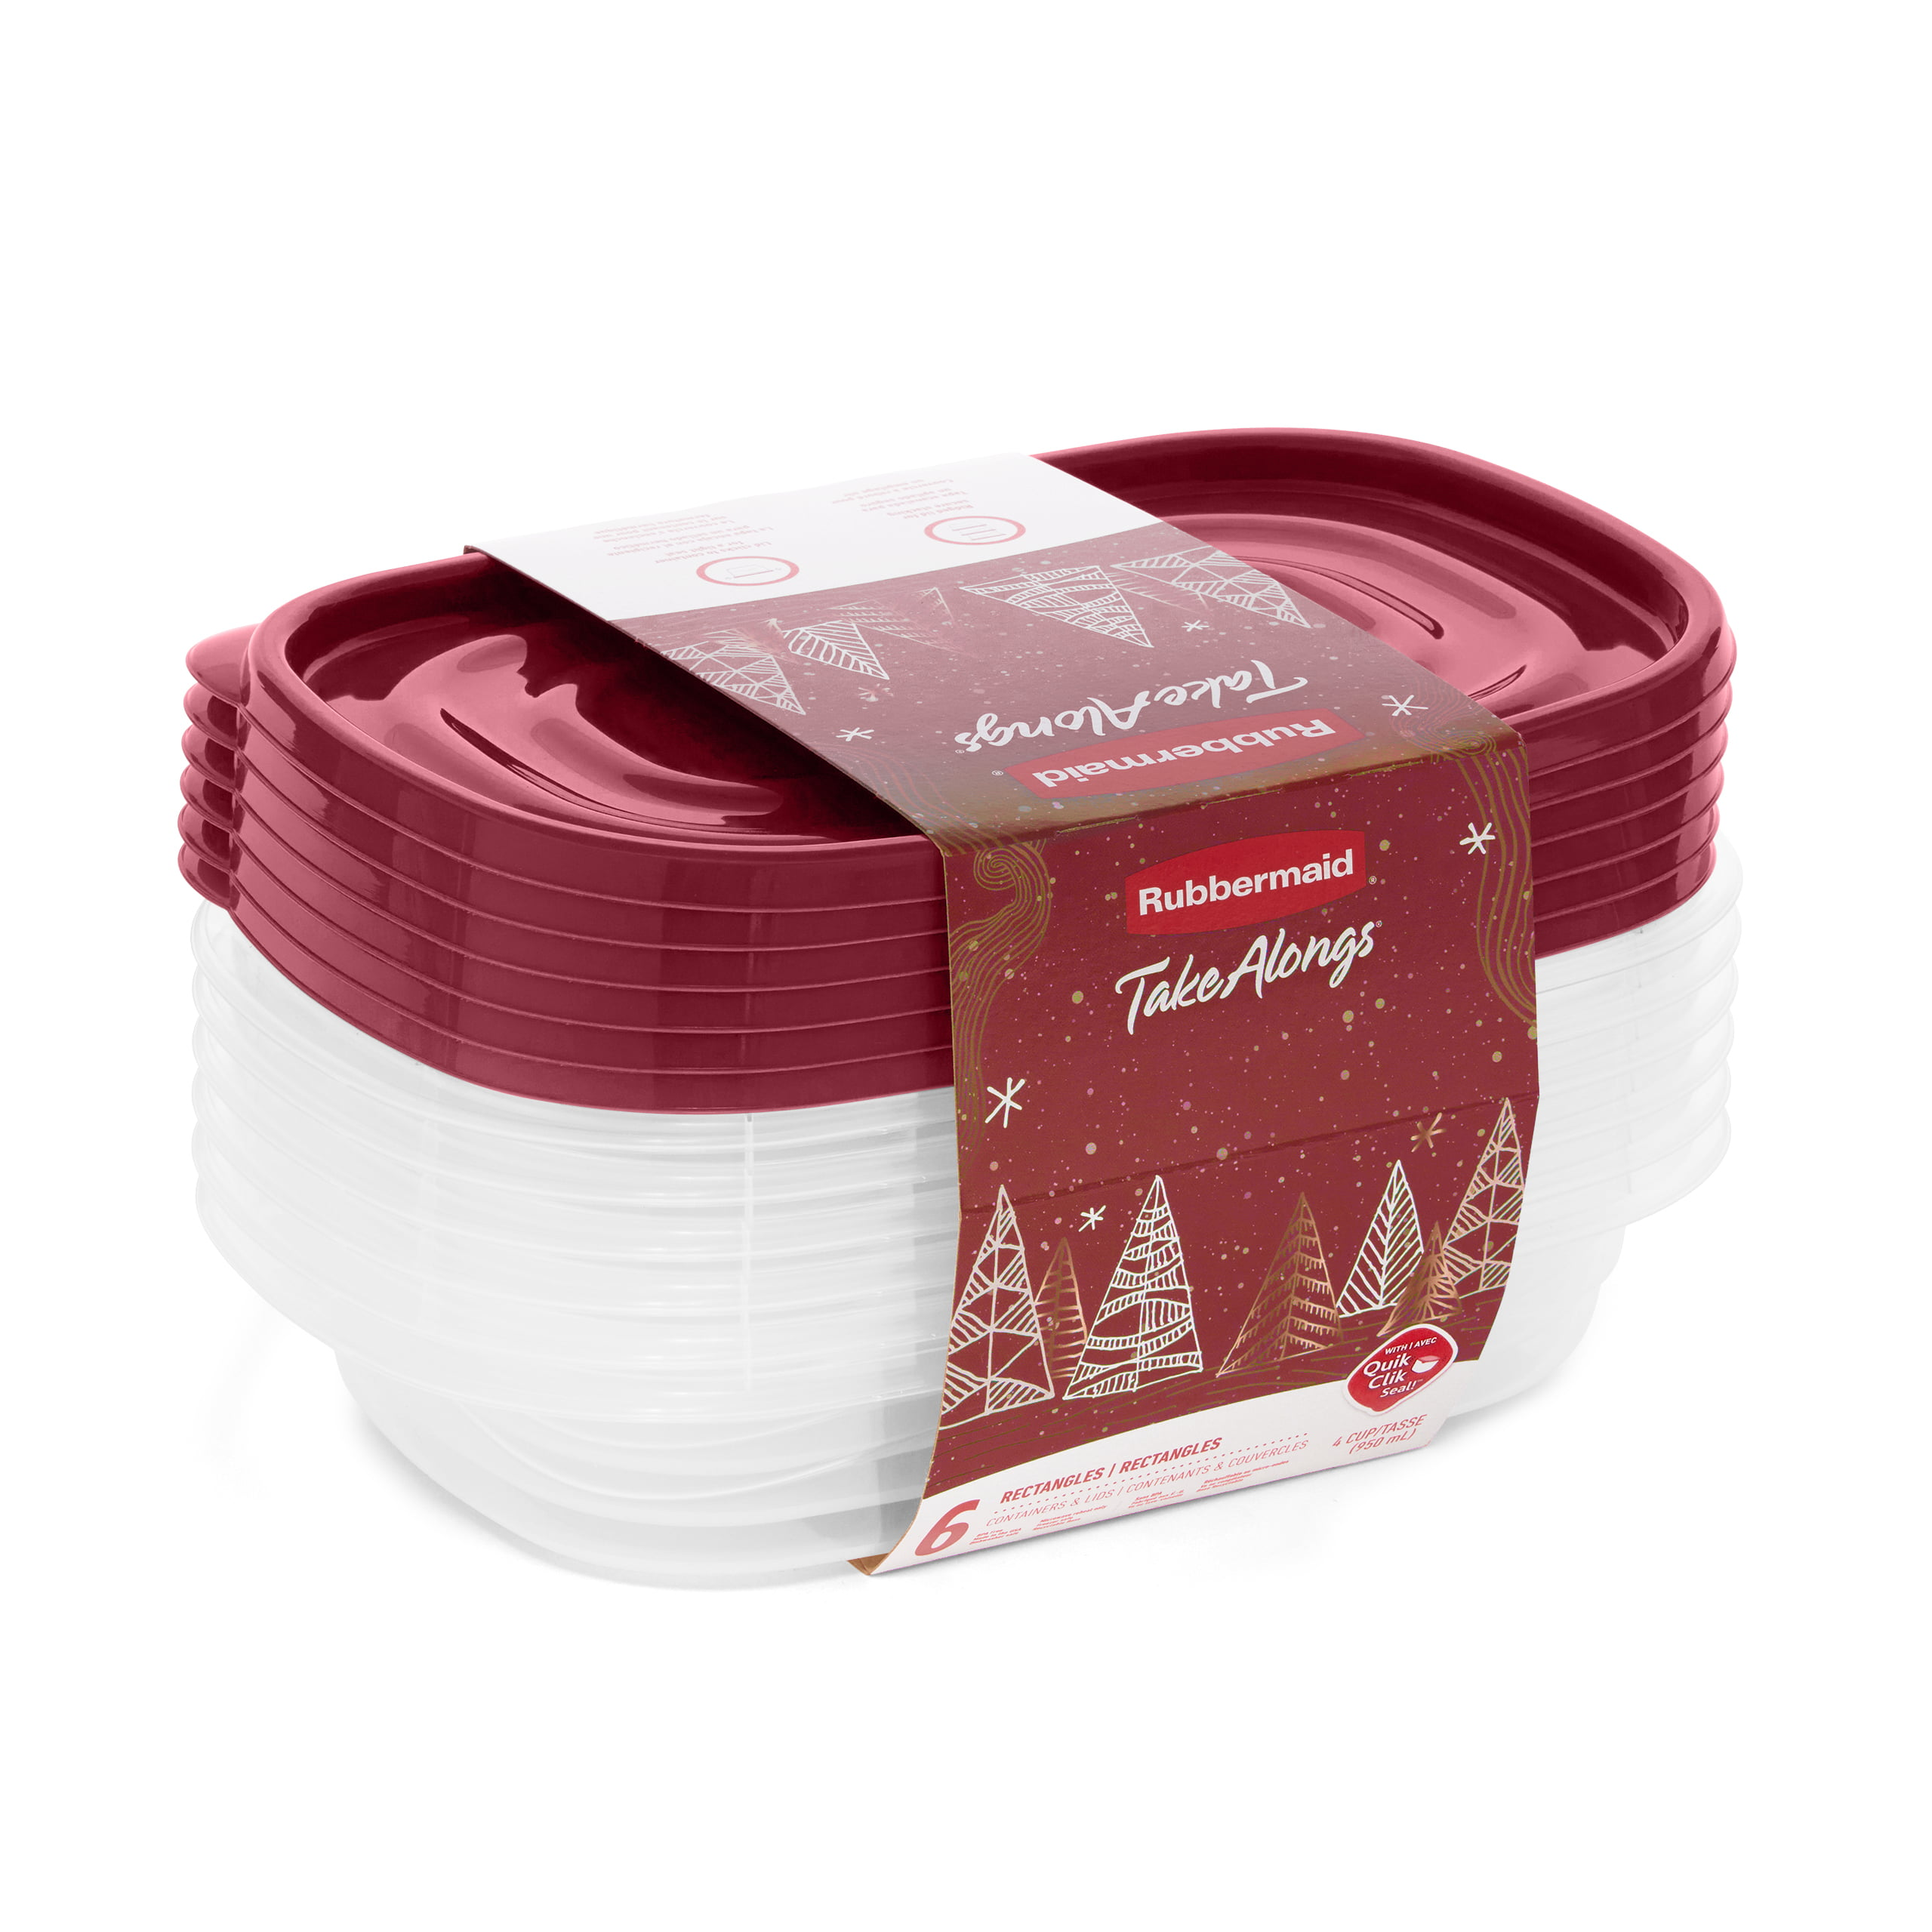 Rubbermaid TakeAlongs 4 Cup Rectangle Food Storage Containers, Set of 6, Rhubarb Red - image 2 of 5